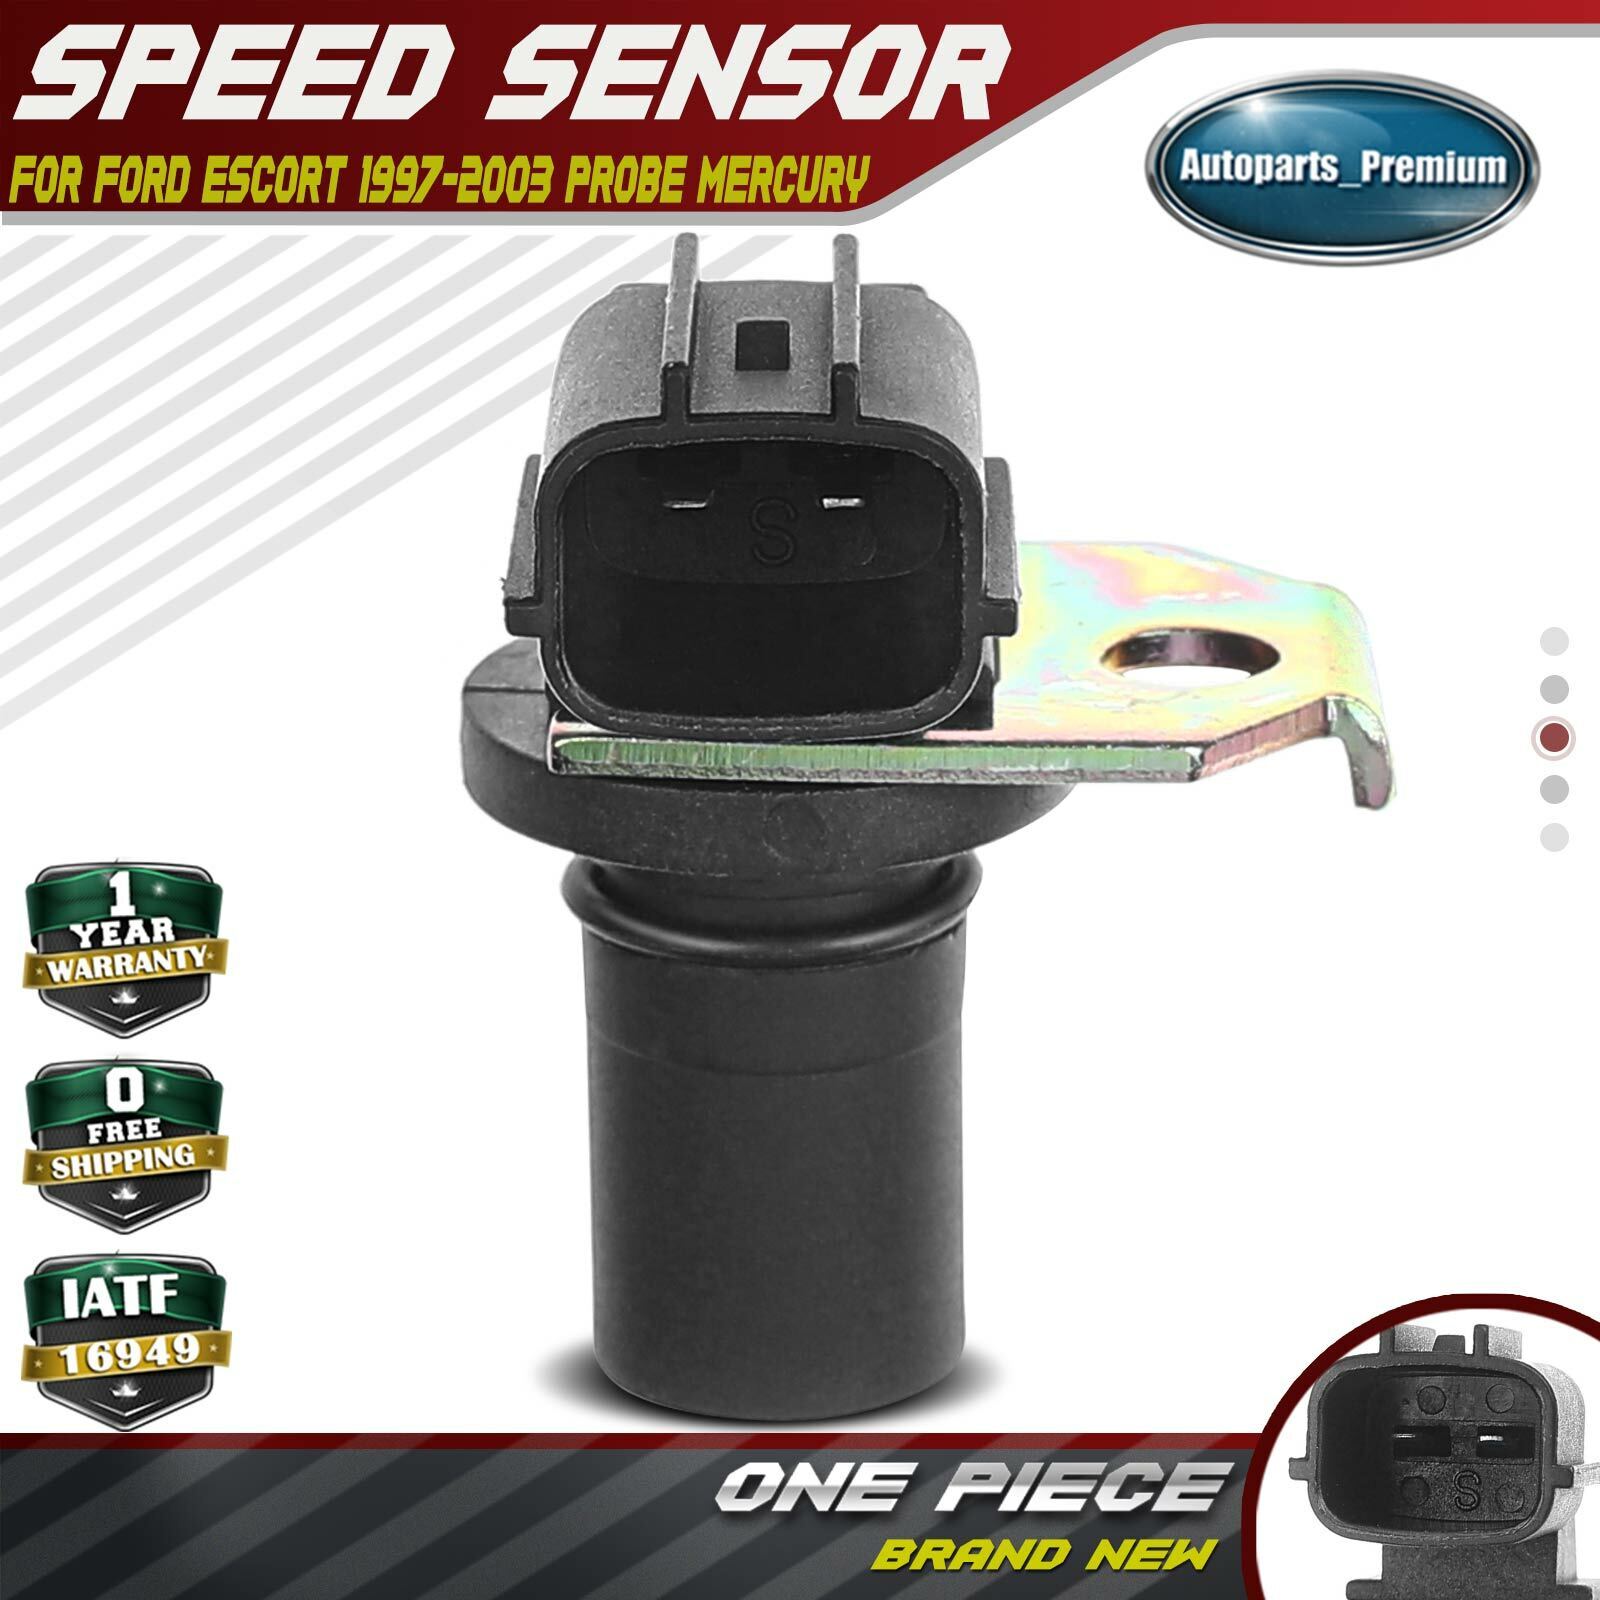 Automatic Transmission Speed Sensor for Ford Escort Probe Mercury Tracer 97-99